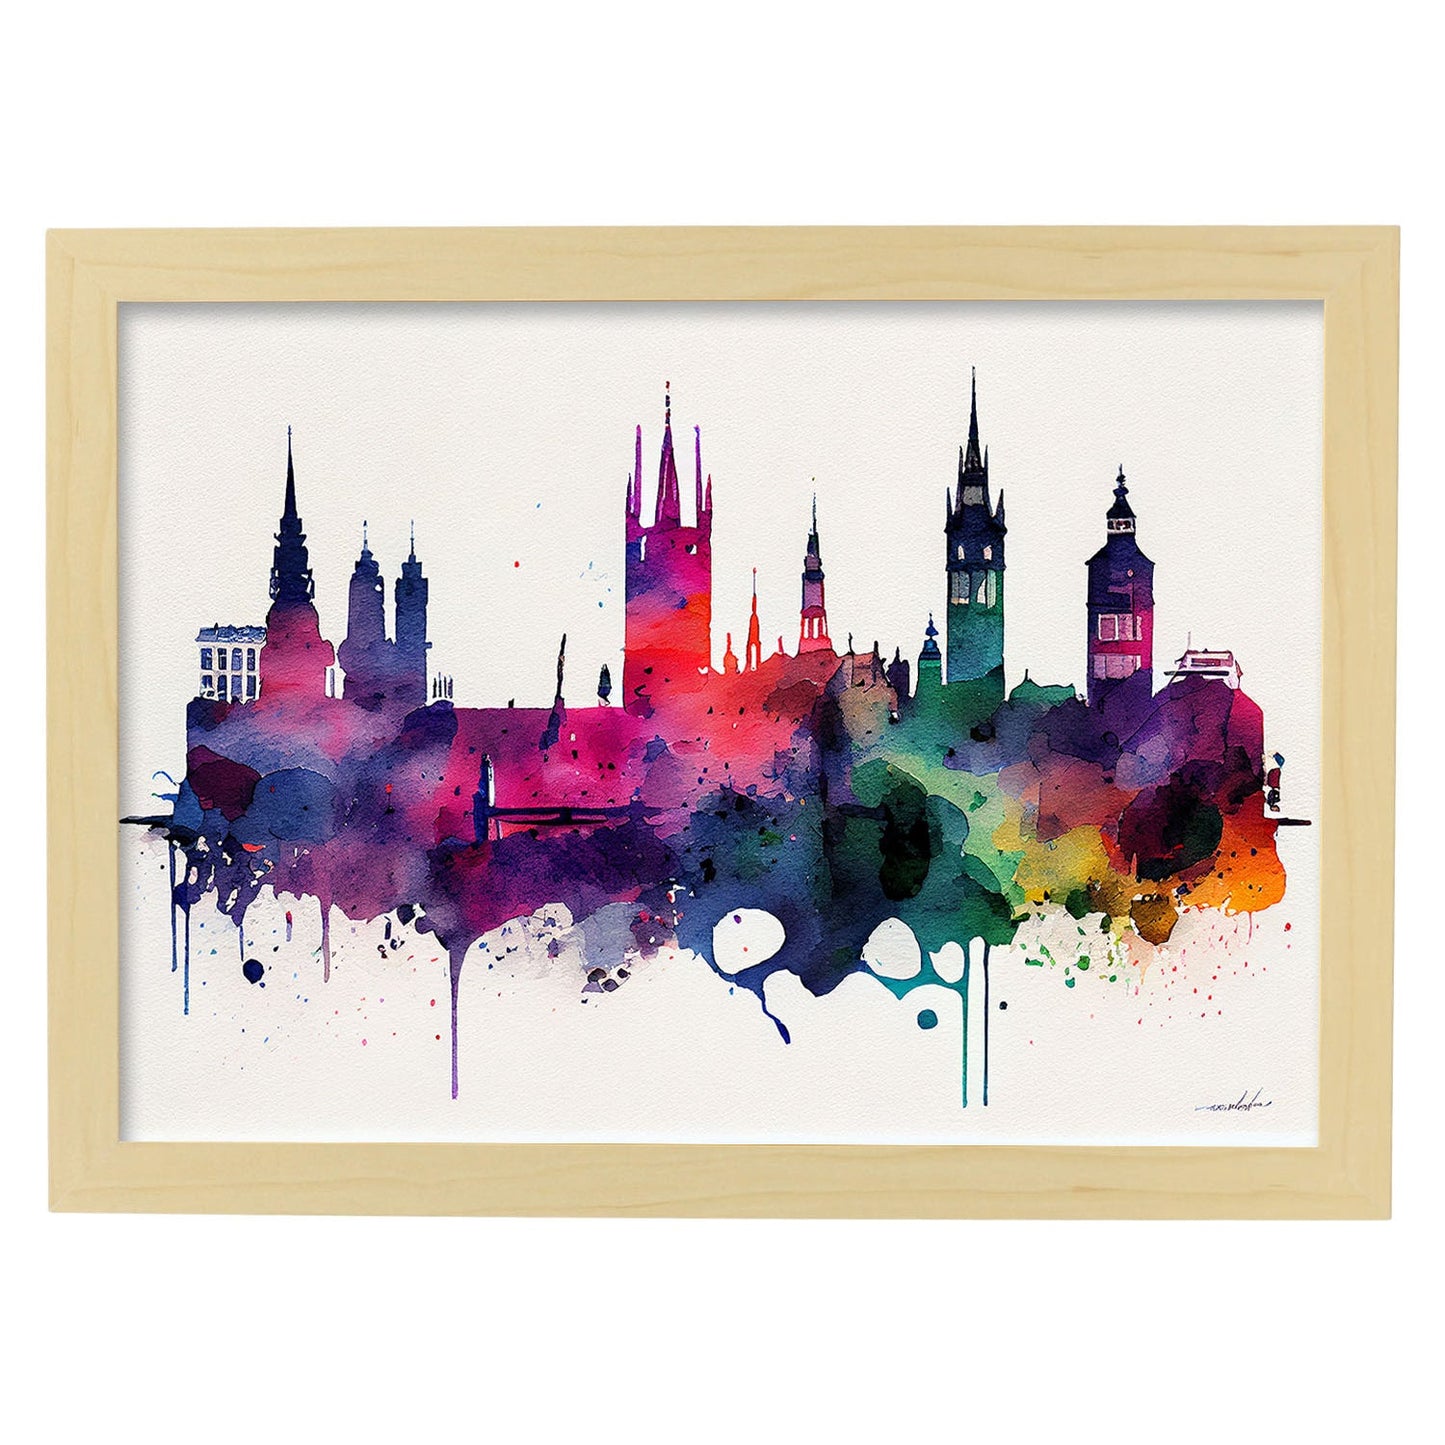 Nacnic watercolor of a skyline of the city of Krakow_1. Aesthetic Wall Art Prints for Bedroom or Living Room Design.-Artwork-Nacnic-A4-Marco Madera Clara-Nacnic Estudio SL